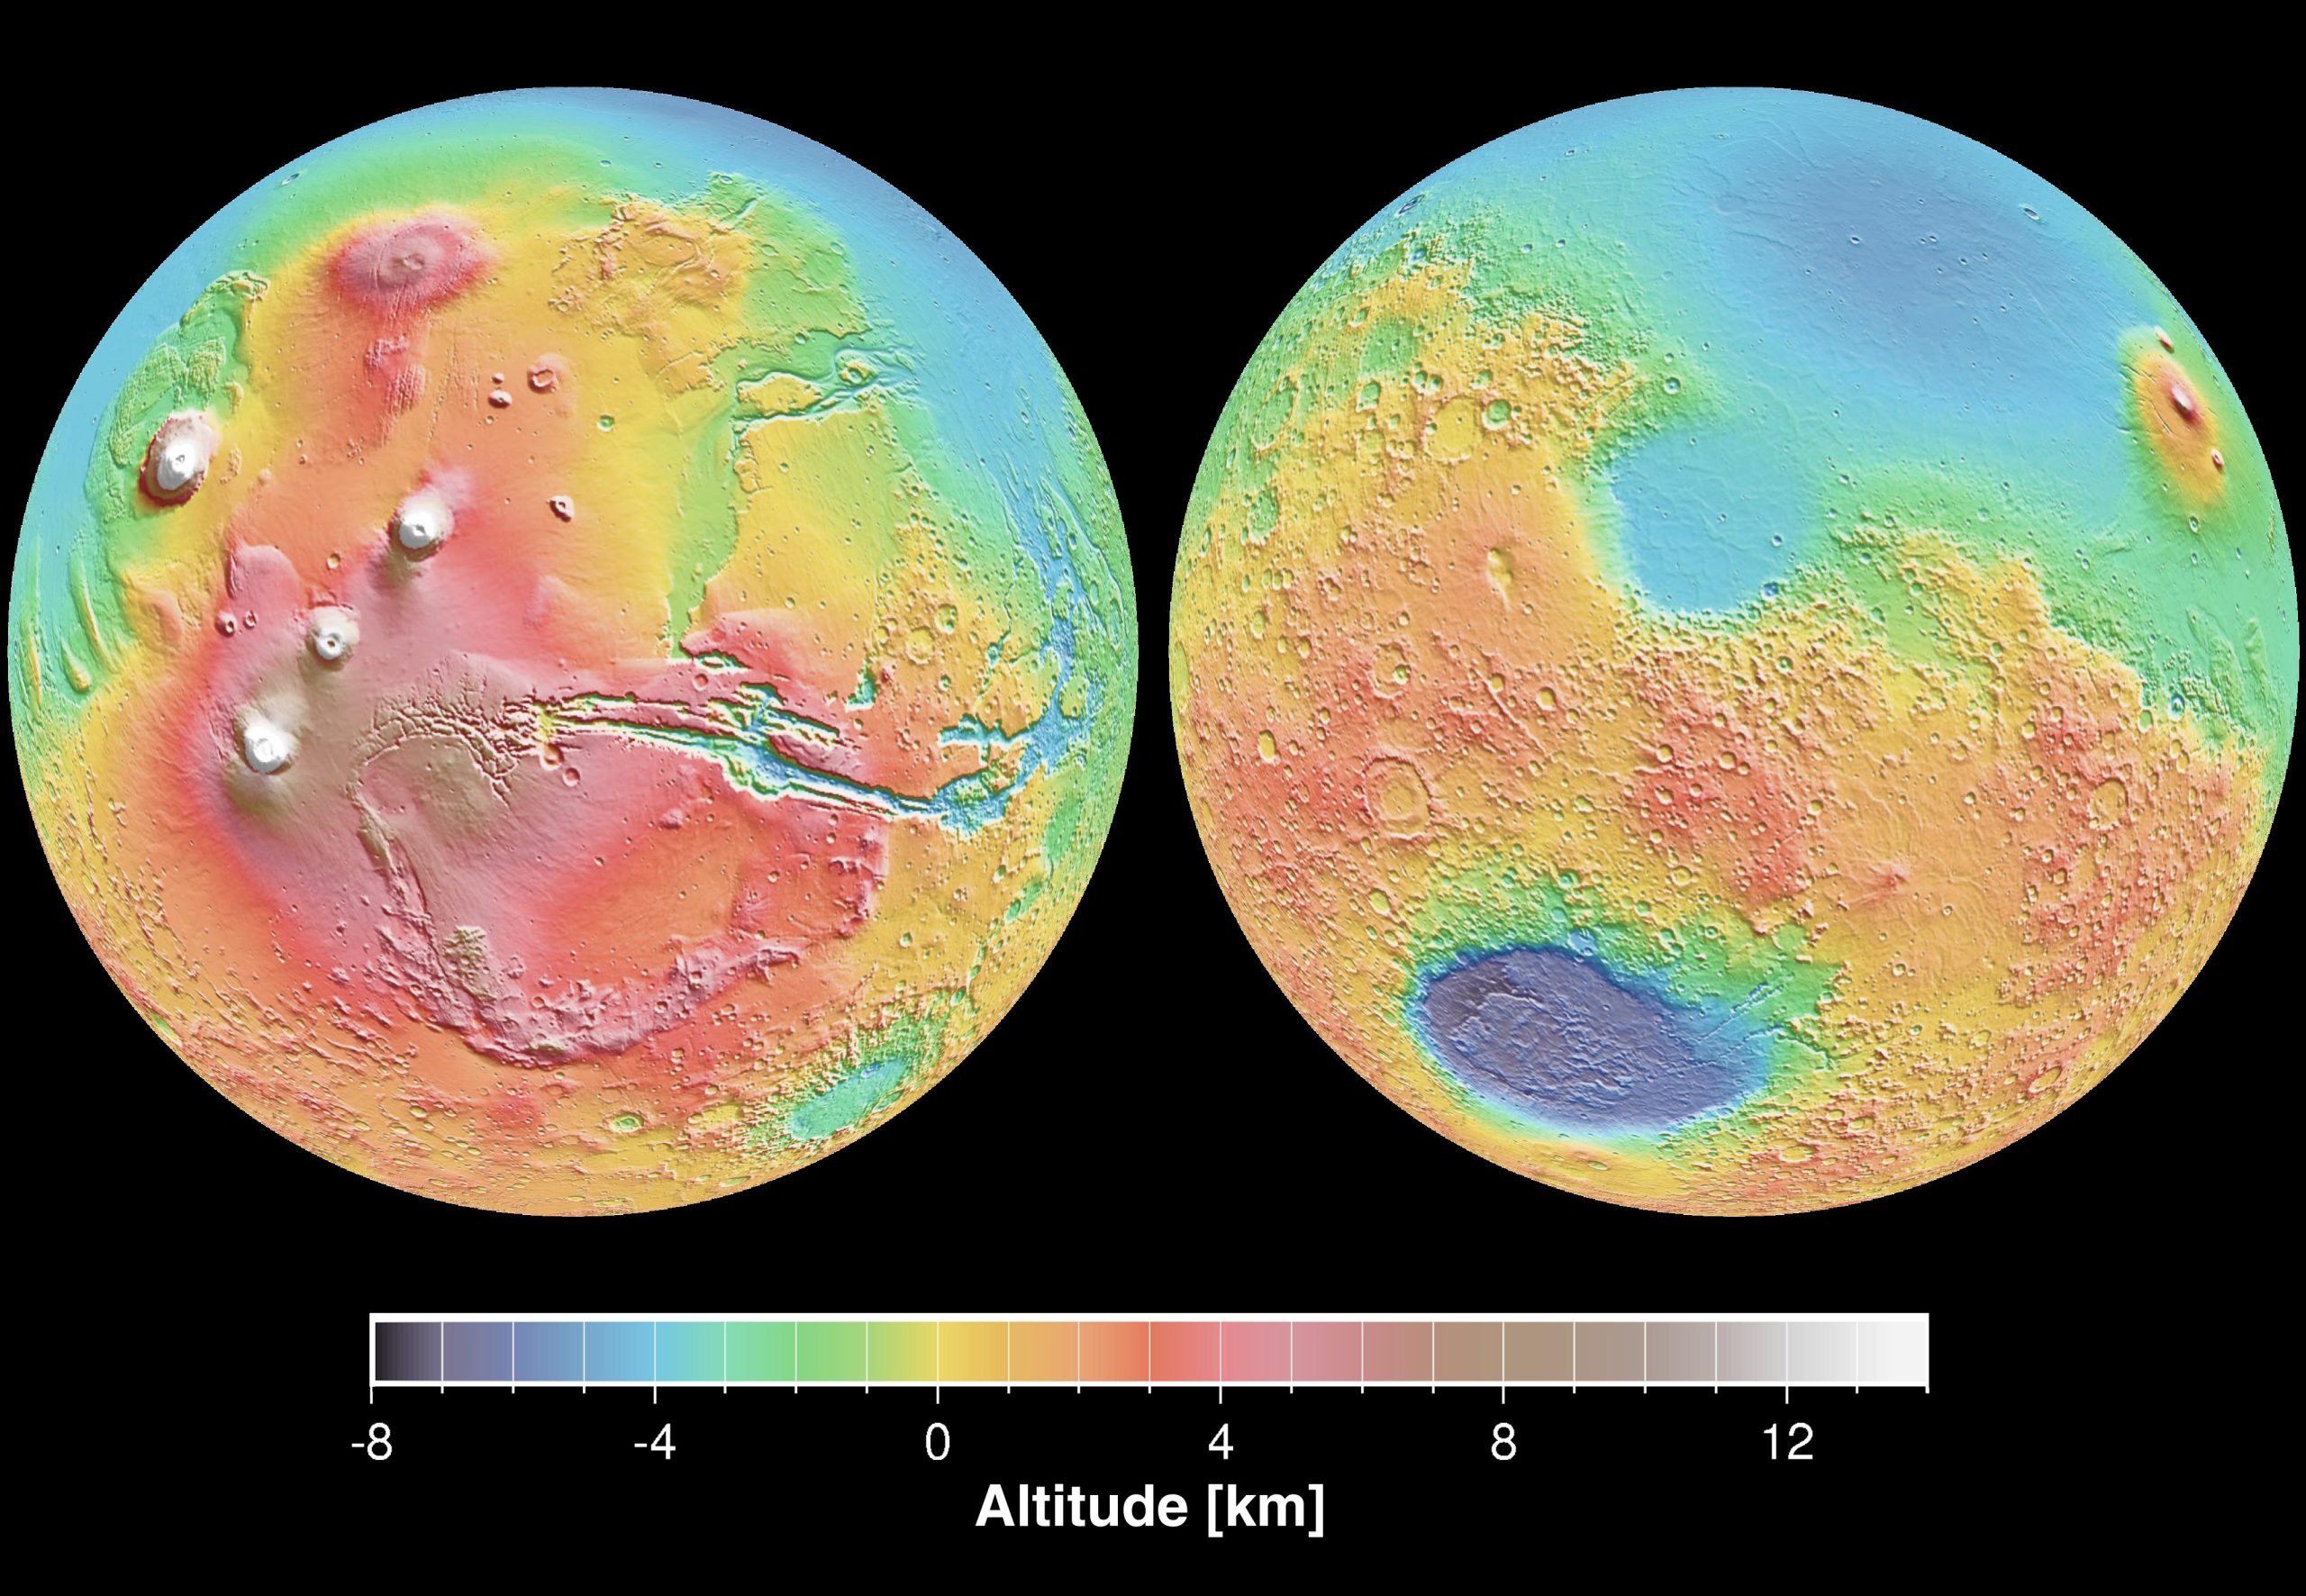 Mars has numerous impact craters that allow us to date the various types of terrain